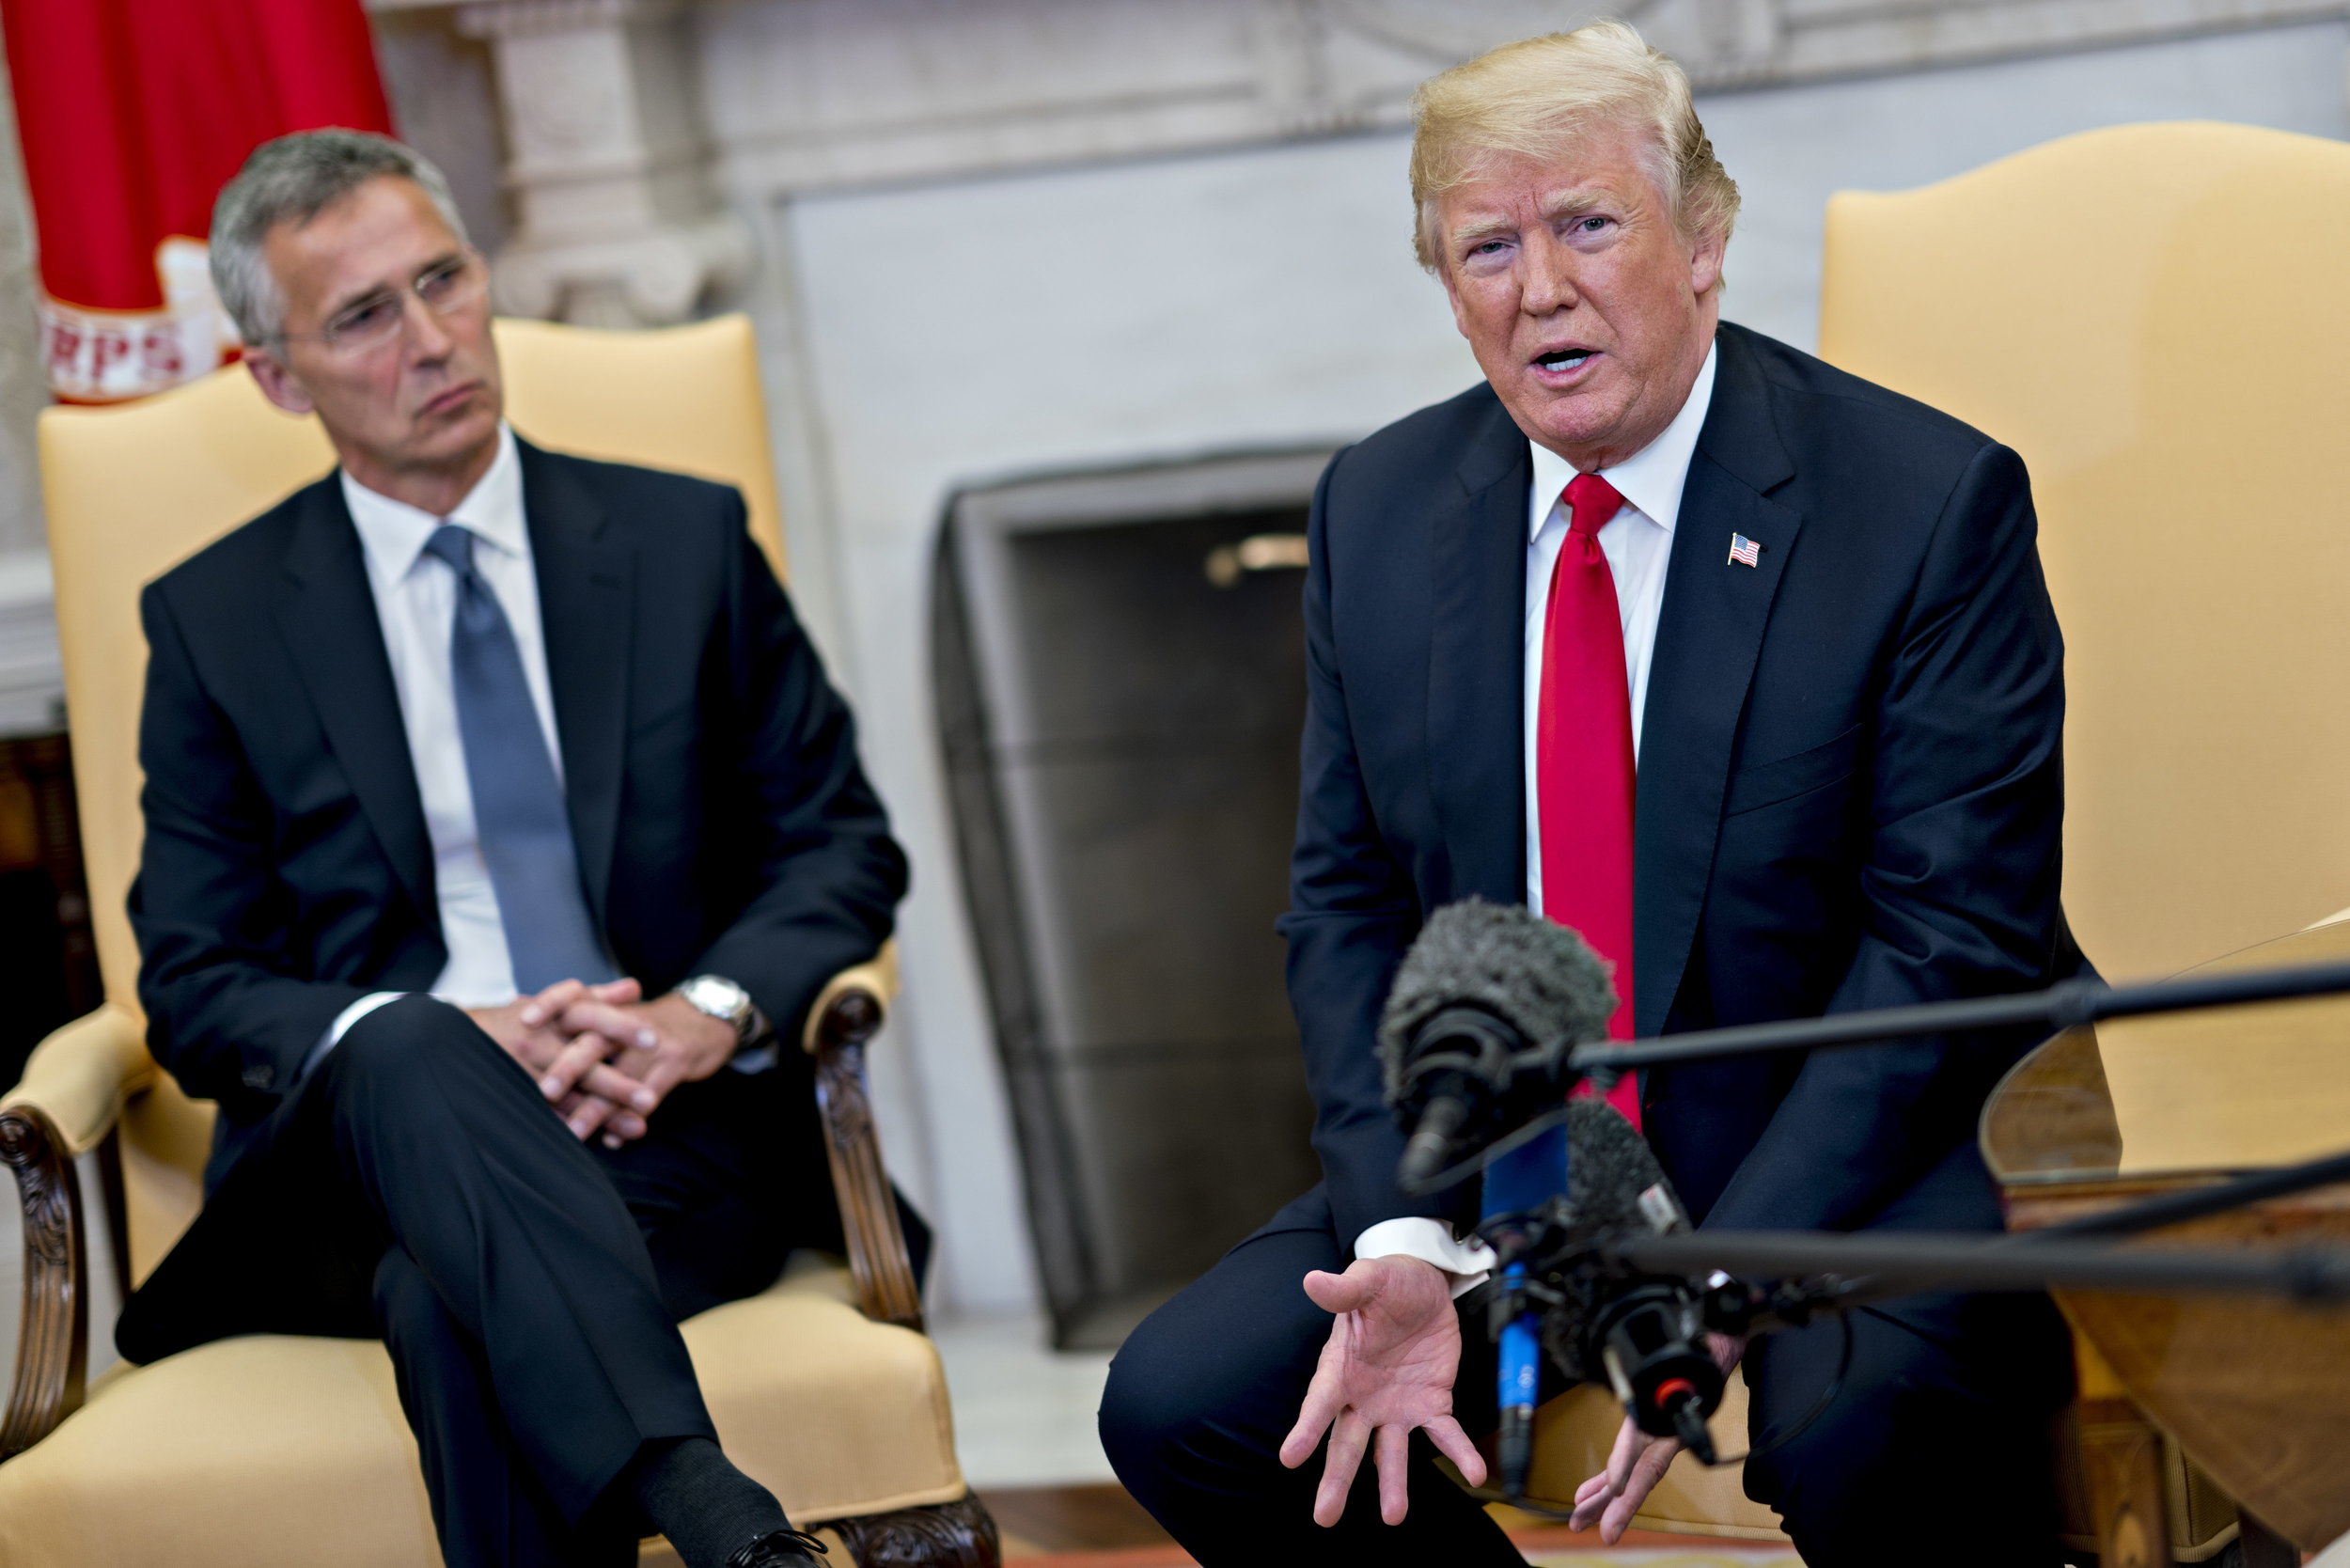 epa06745656 US President Donald J. Trump (R) speaks as Jens Stoltenberg (L), secretary general of the North Atlantic Treaty Organization (NATO), listens during a meeting in the Oval Office of the White House in Washington, DC, USA, 17 May 2018. The White House said the two leaders will be discussing the upcoming NATO Summit in July.  EPA/Andrew Harrer / POOL